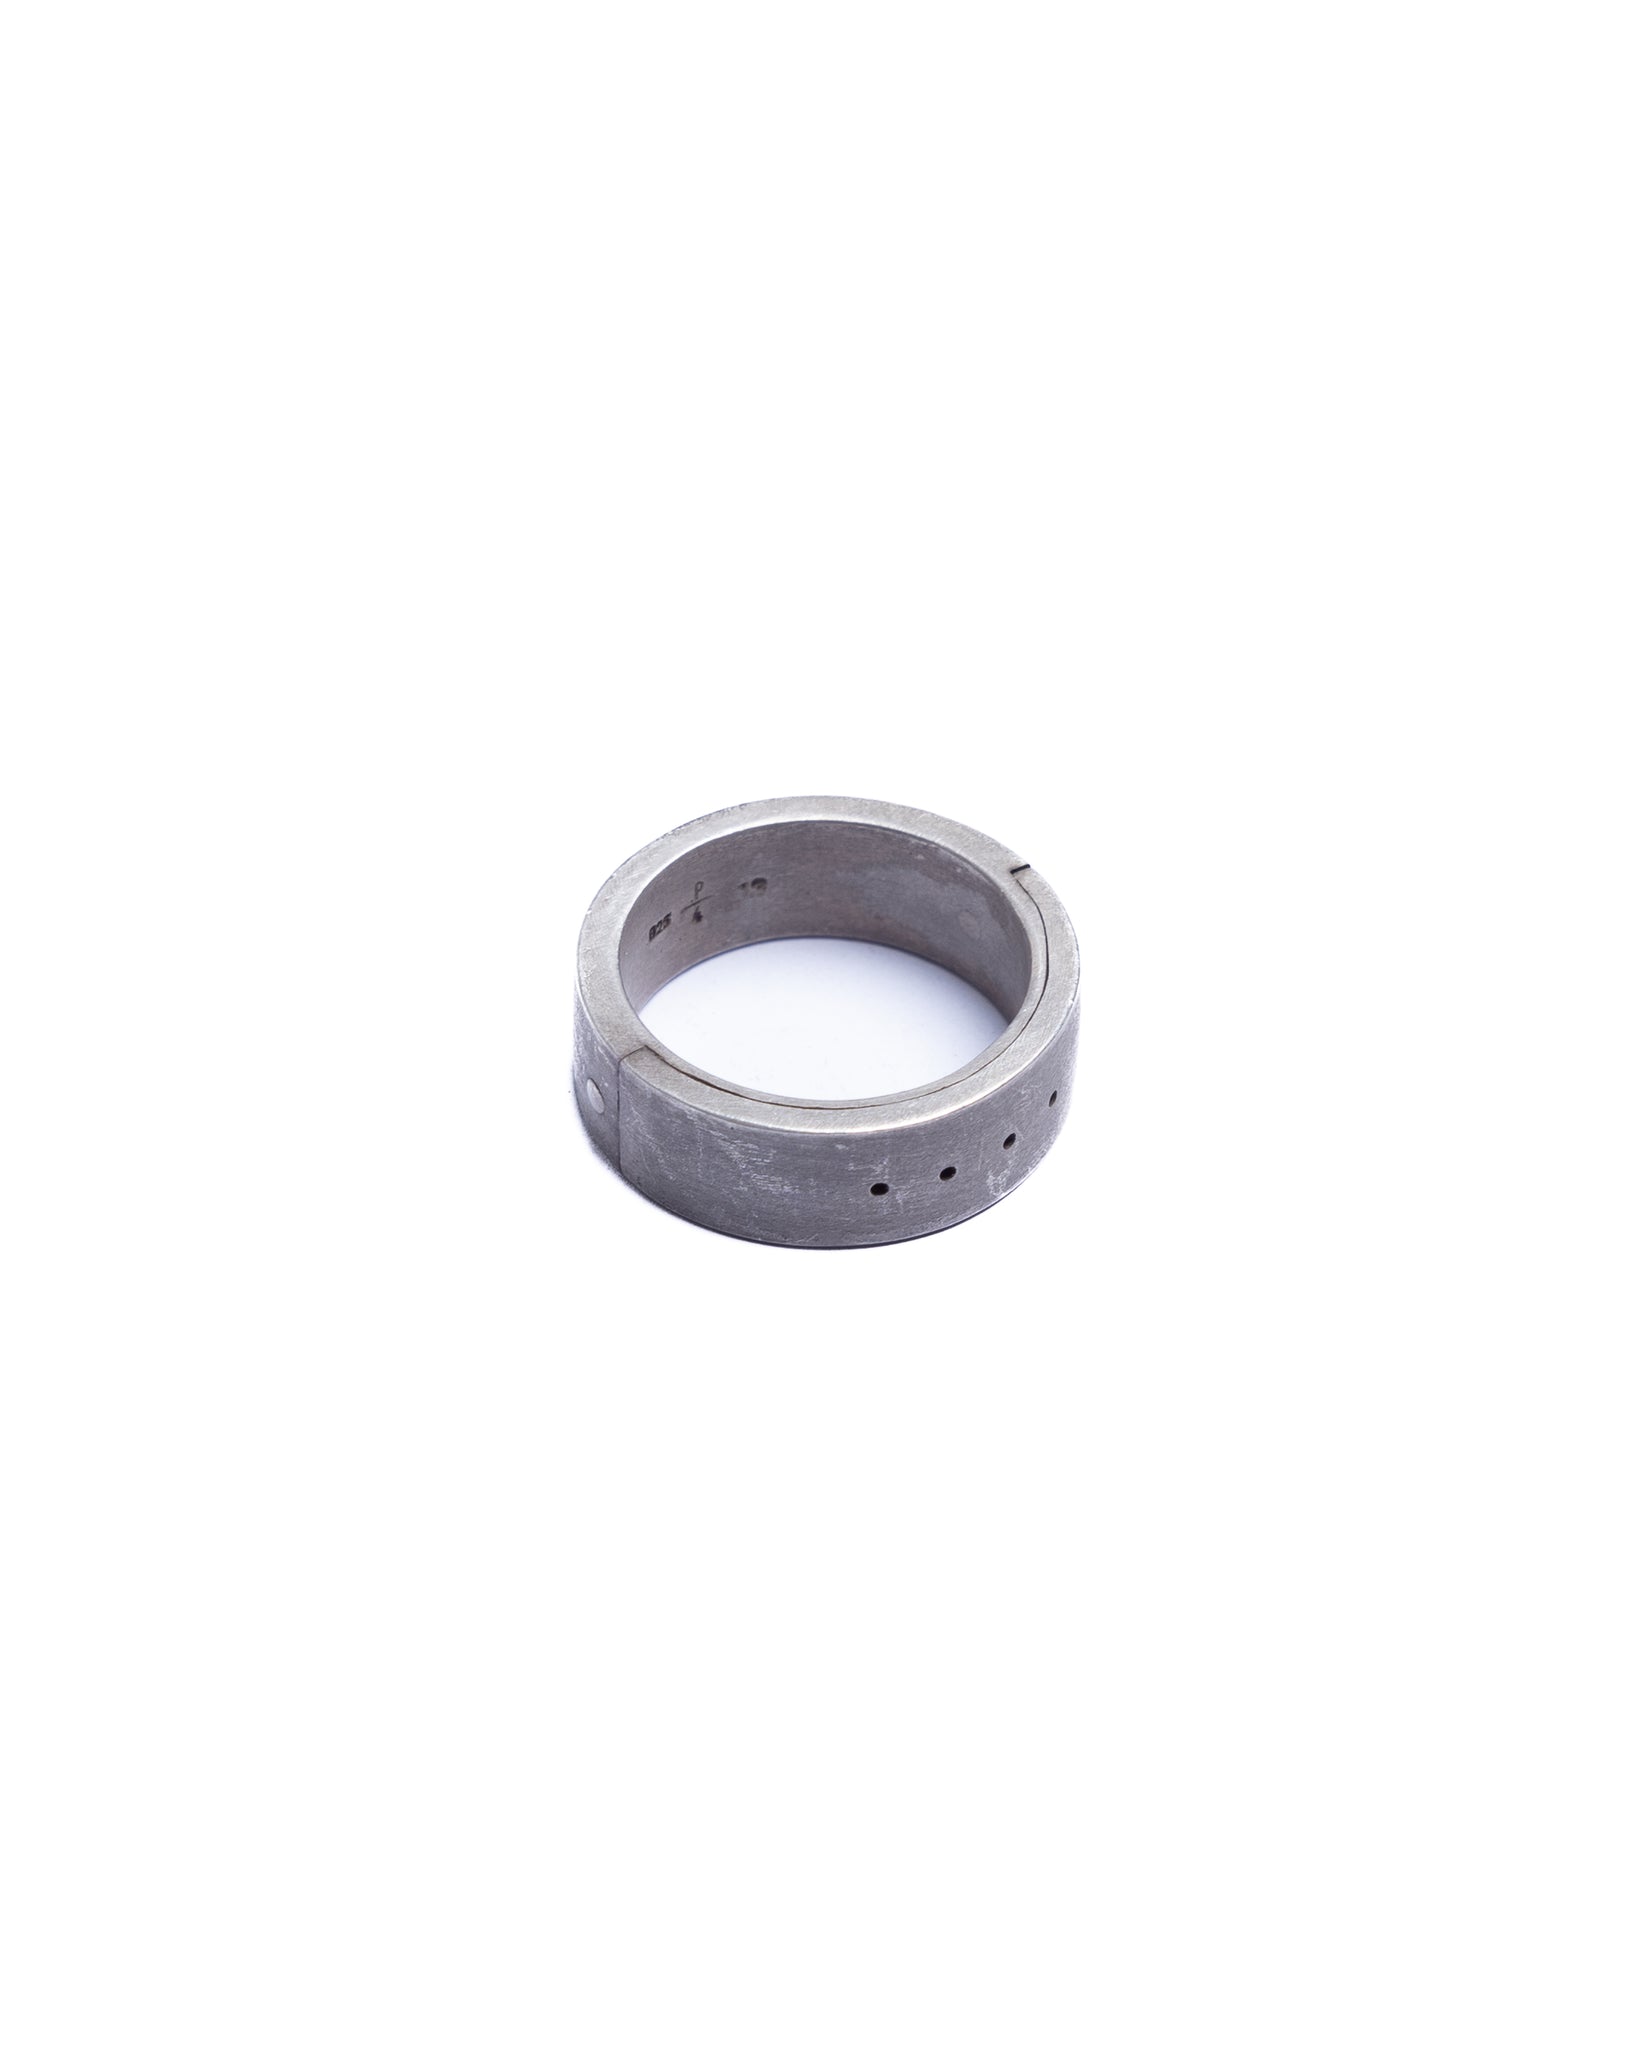 Parts of Four Sistema Ring 4-Hole 9mm Silver